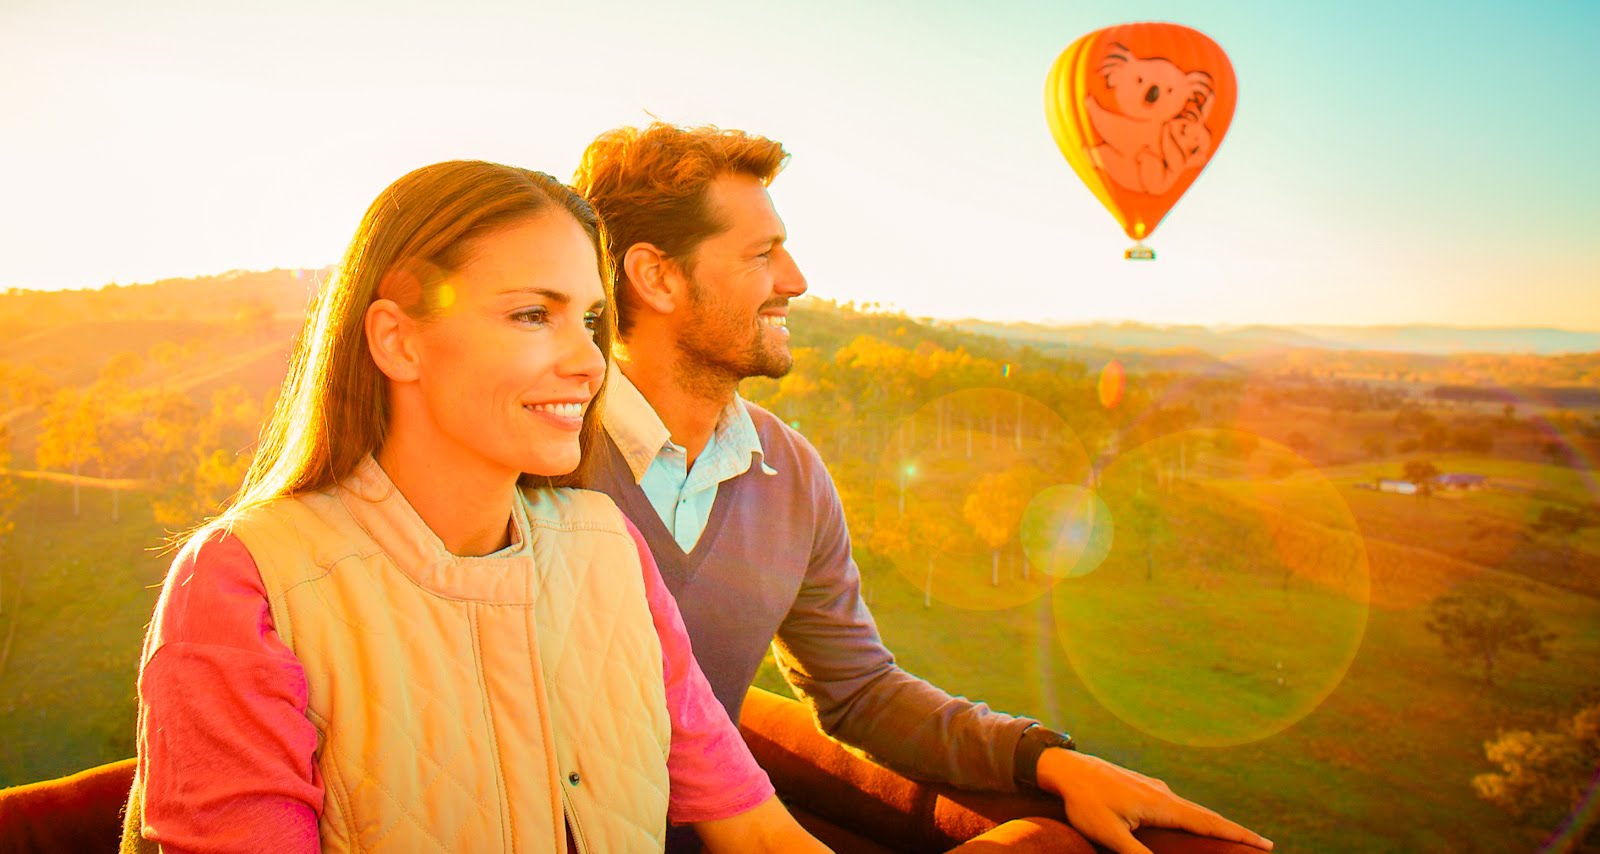 Romance of flying in a hot air balloon on the scenic gold coast hinterland